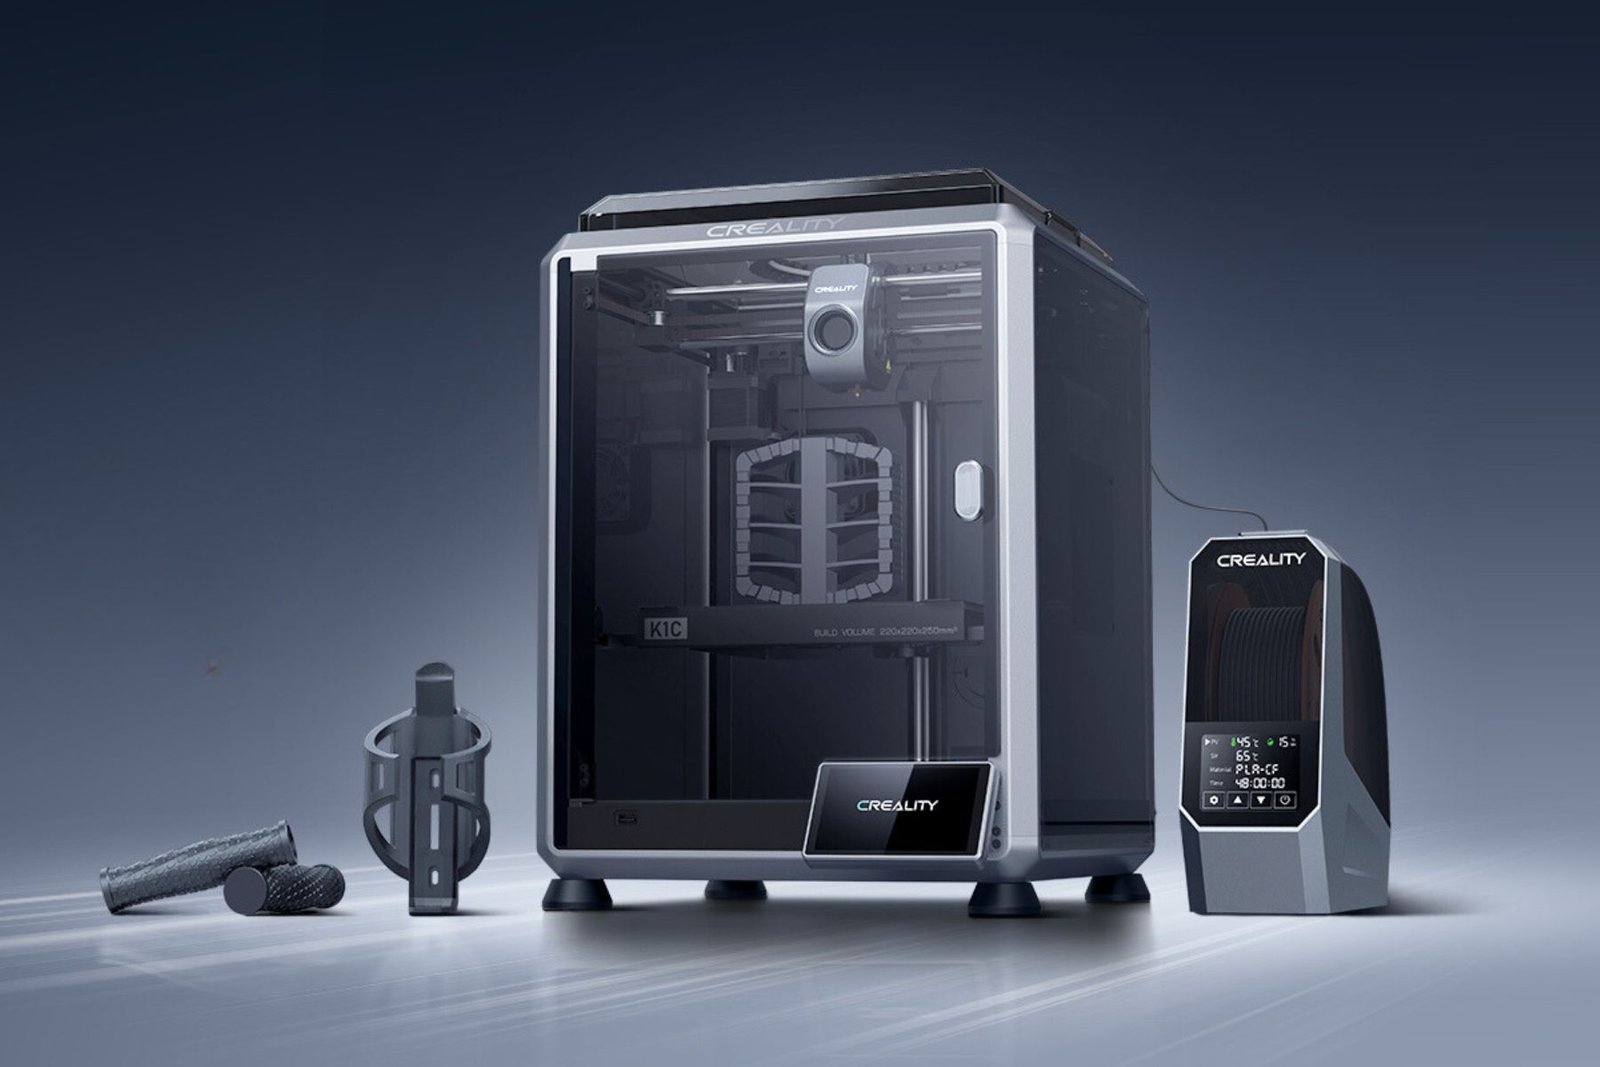 Creality K1C 3D printer announced with carbon fiber filament support and air purifier